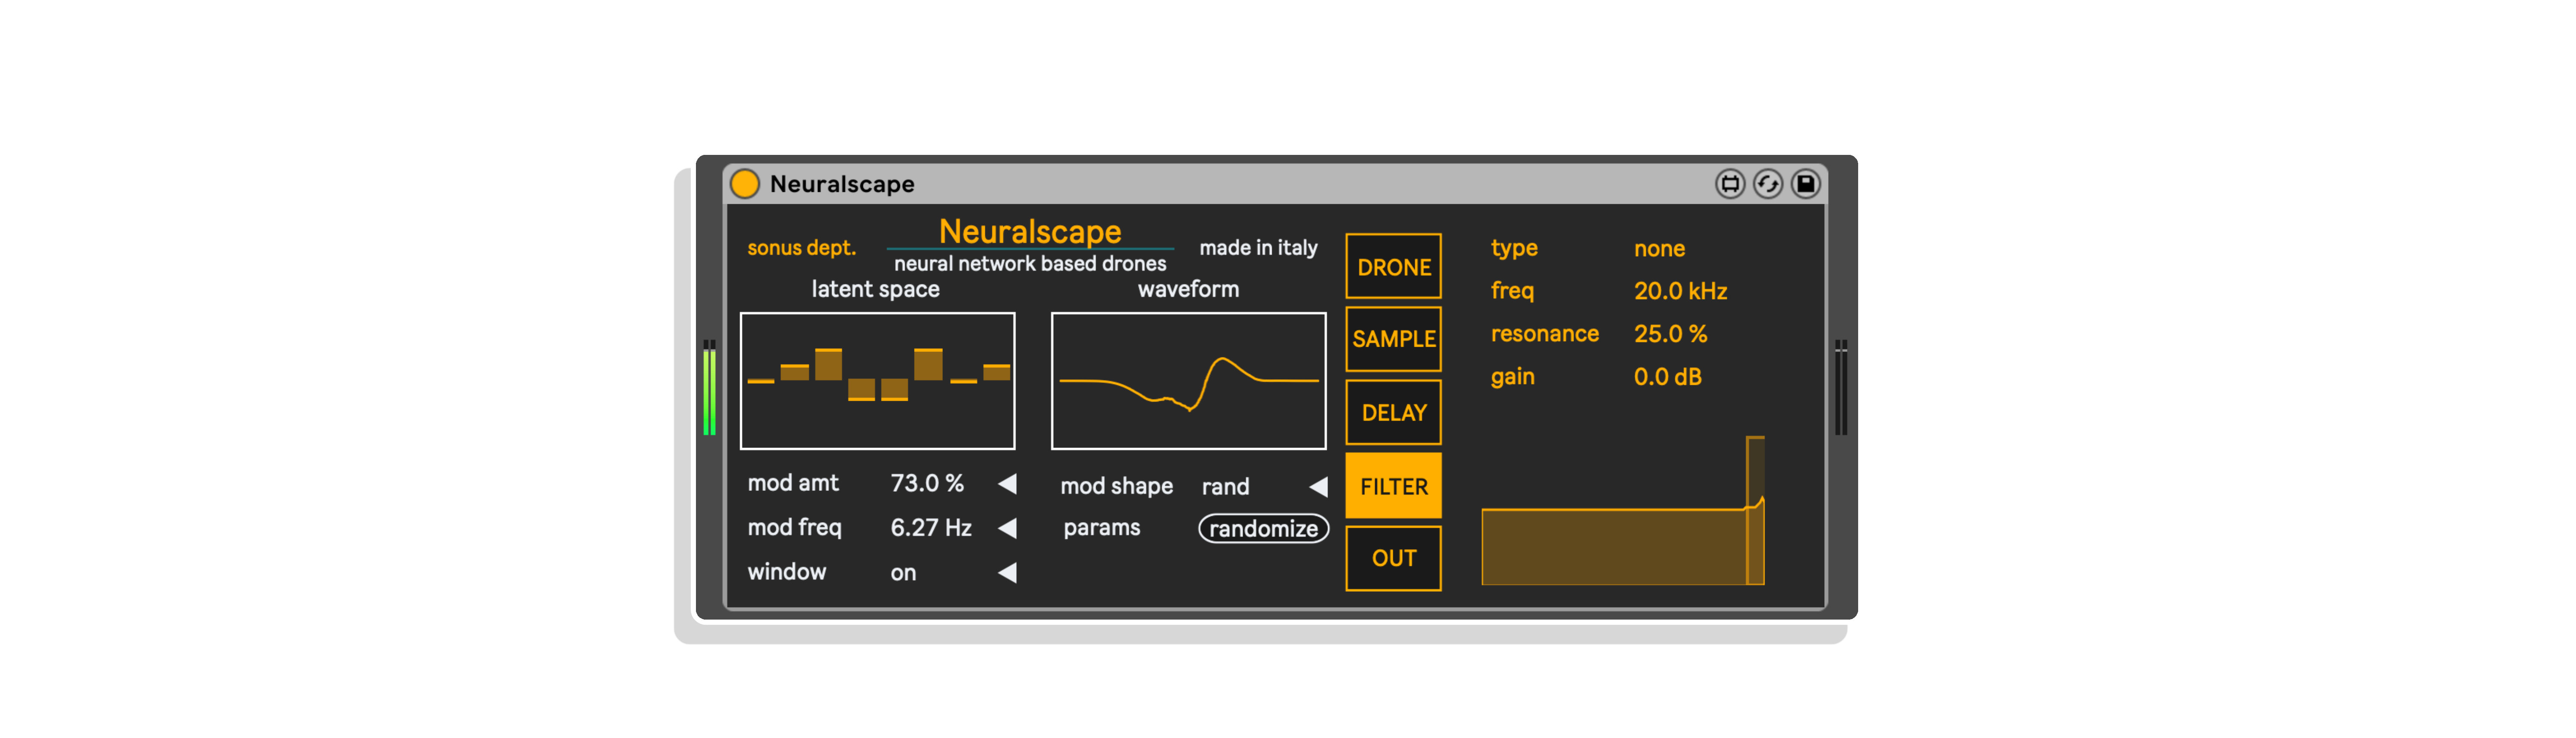 Neuraloot MaxforLive Devices for Ableton Live by Sonus Dept.